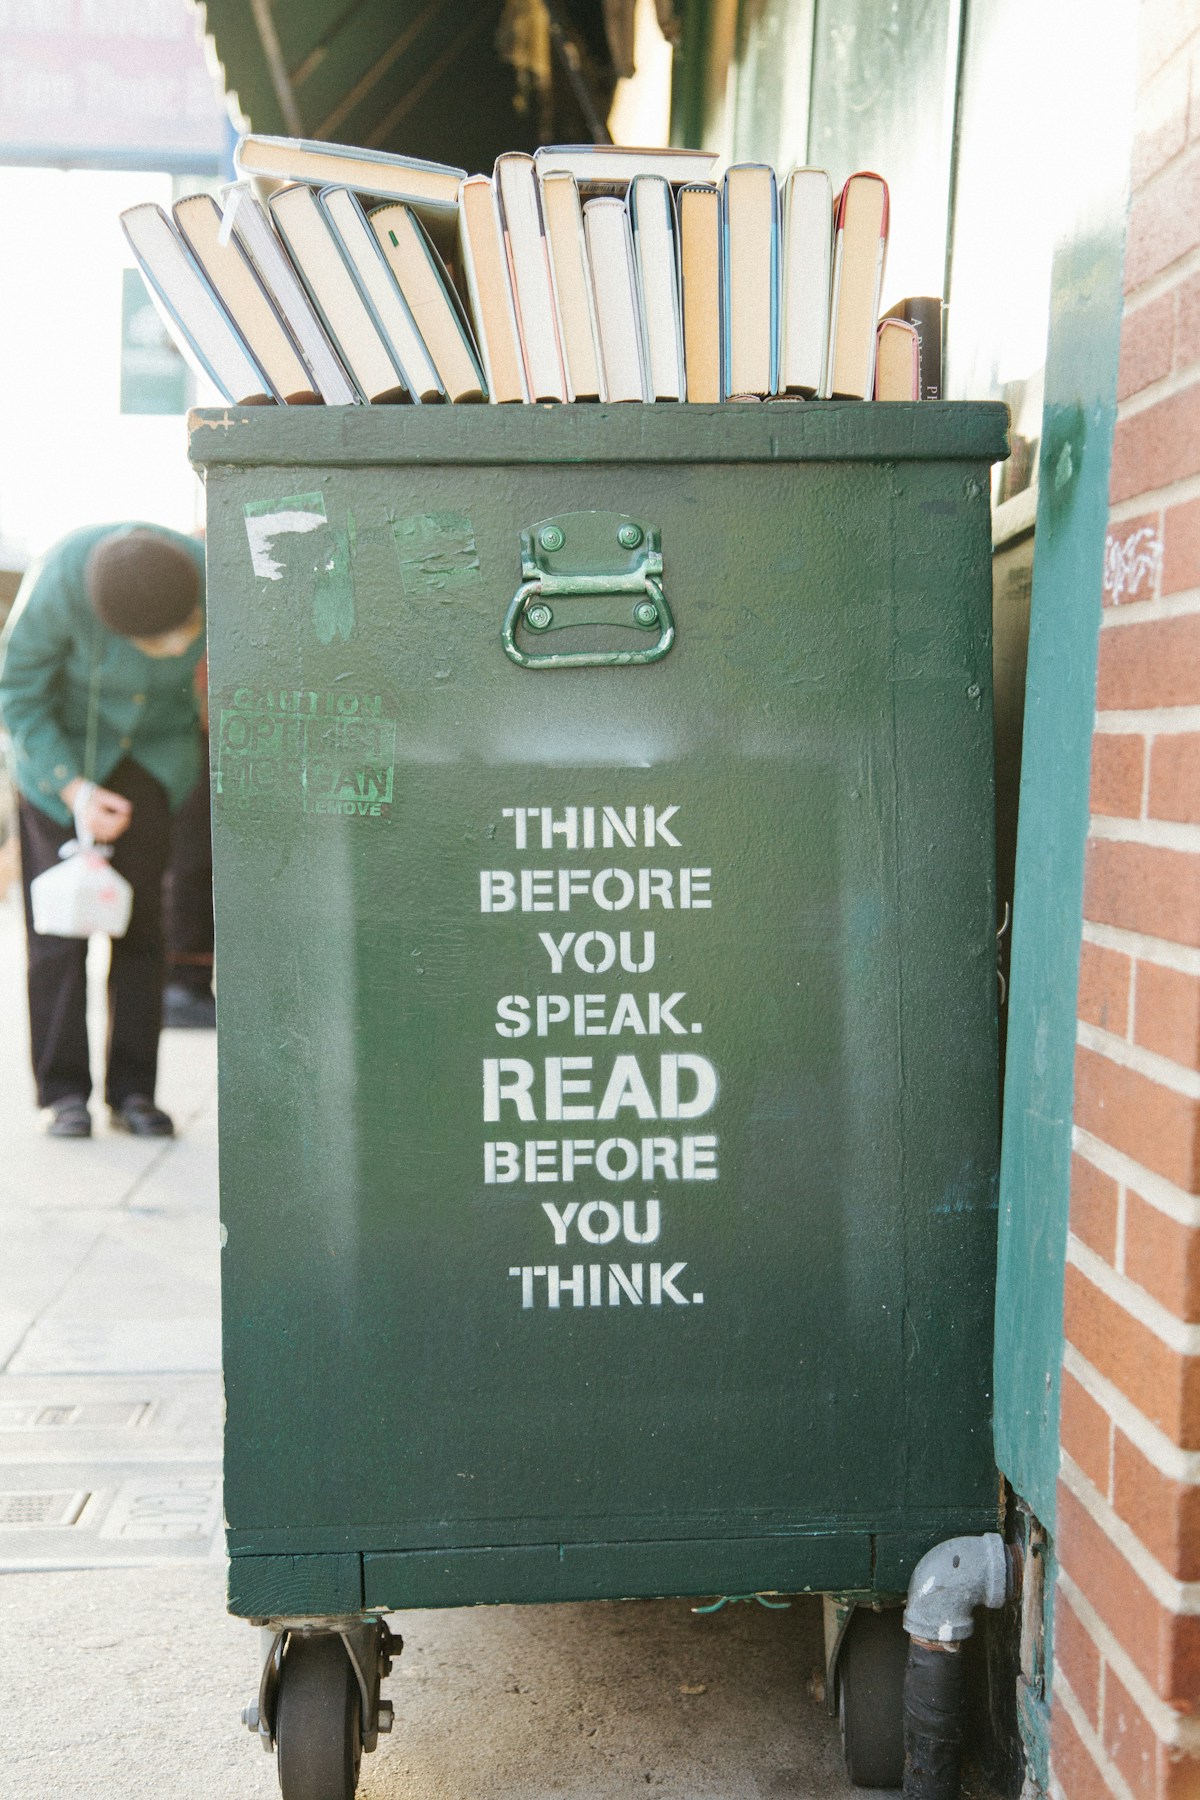 Books on a green cart next to a brick wall.  White text in stencil says "THINK BEFORE YOU SPEAK.  READ BEFORE YOU THINK."  The word READ is twice as large.